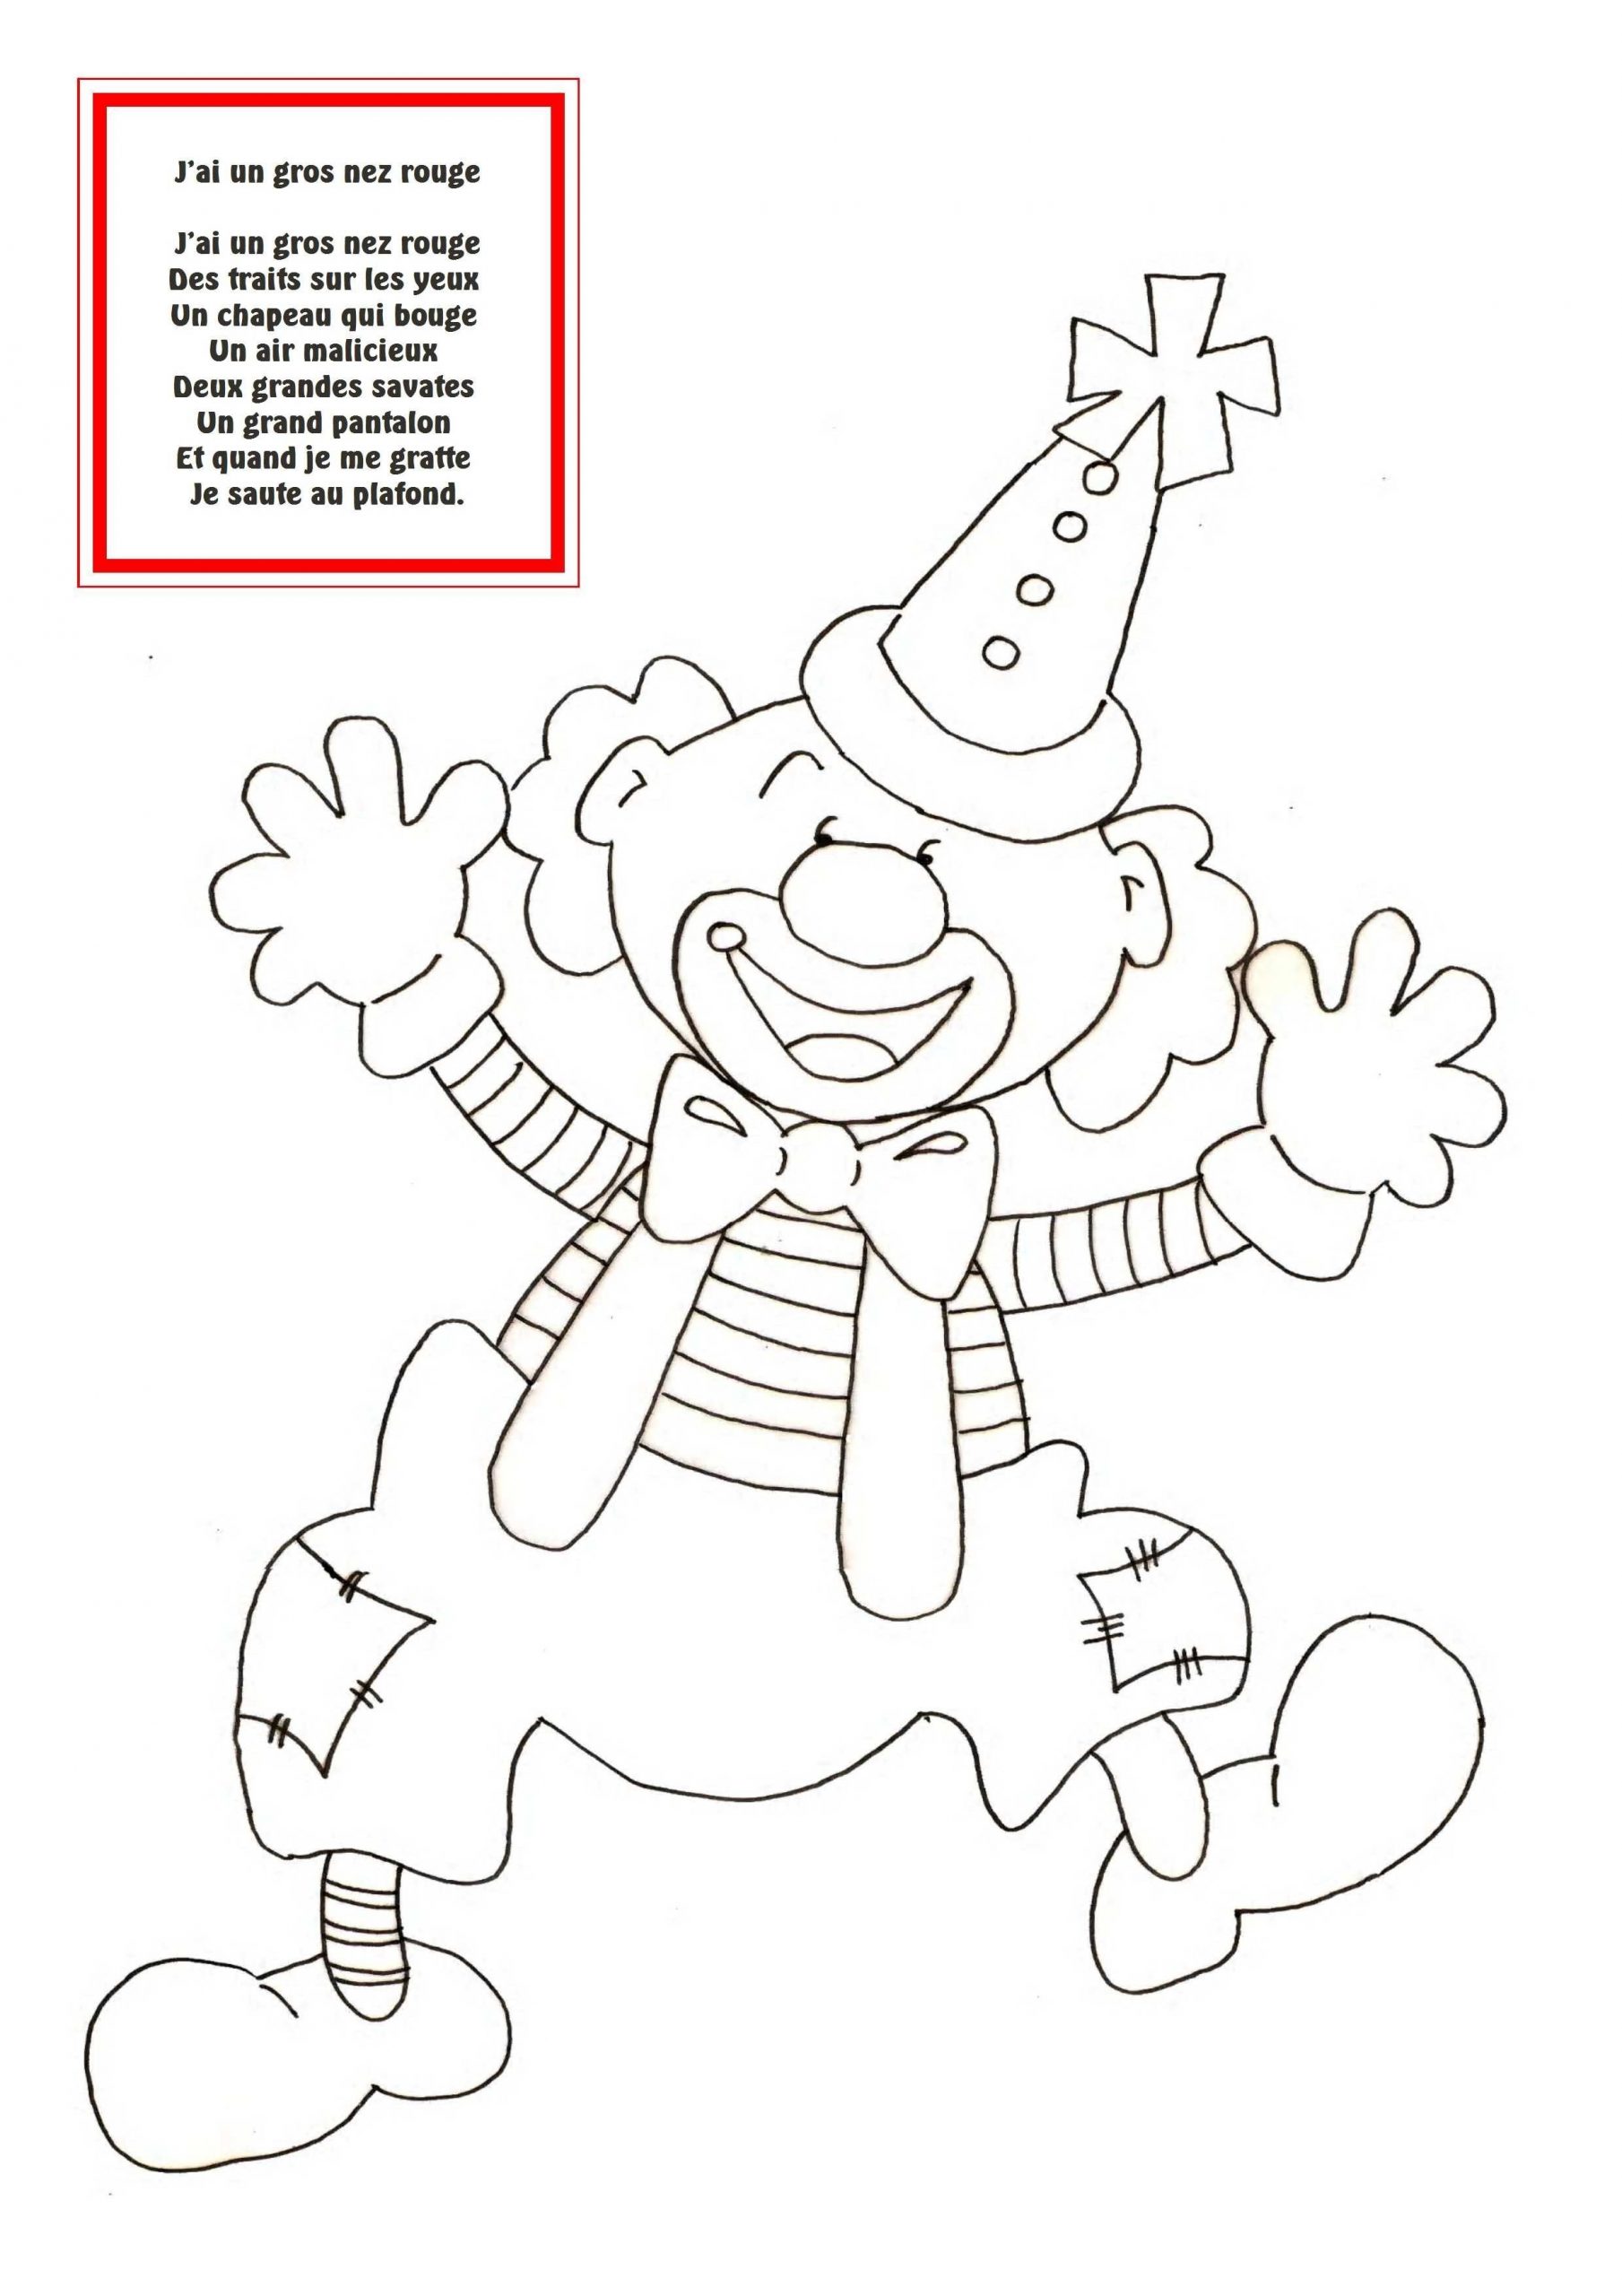 38 Coloriage Carnaval Maternelle In 2020 | Clown, Coloring avec Coloriage Carnaval Maternelle